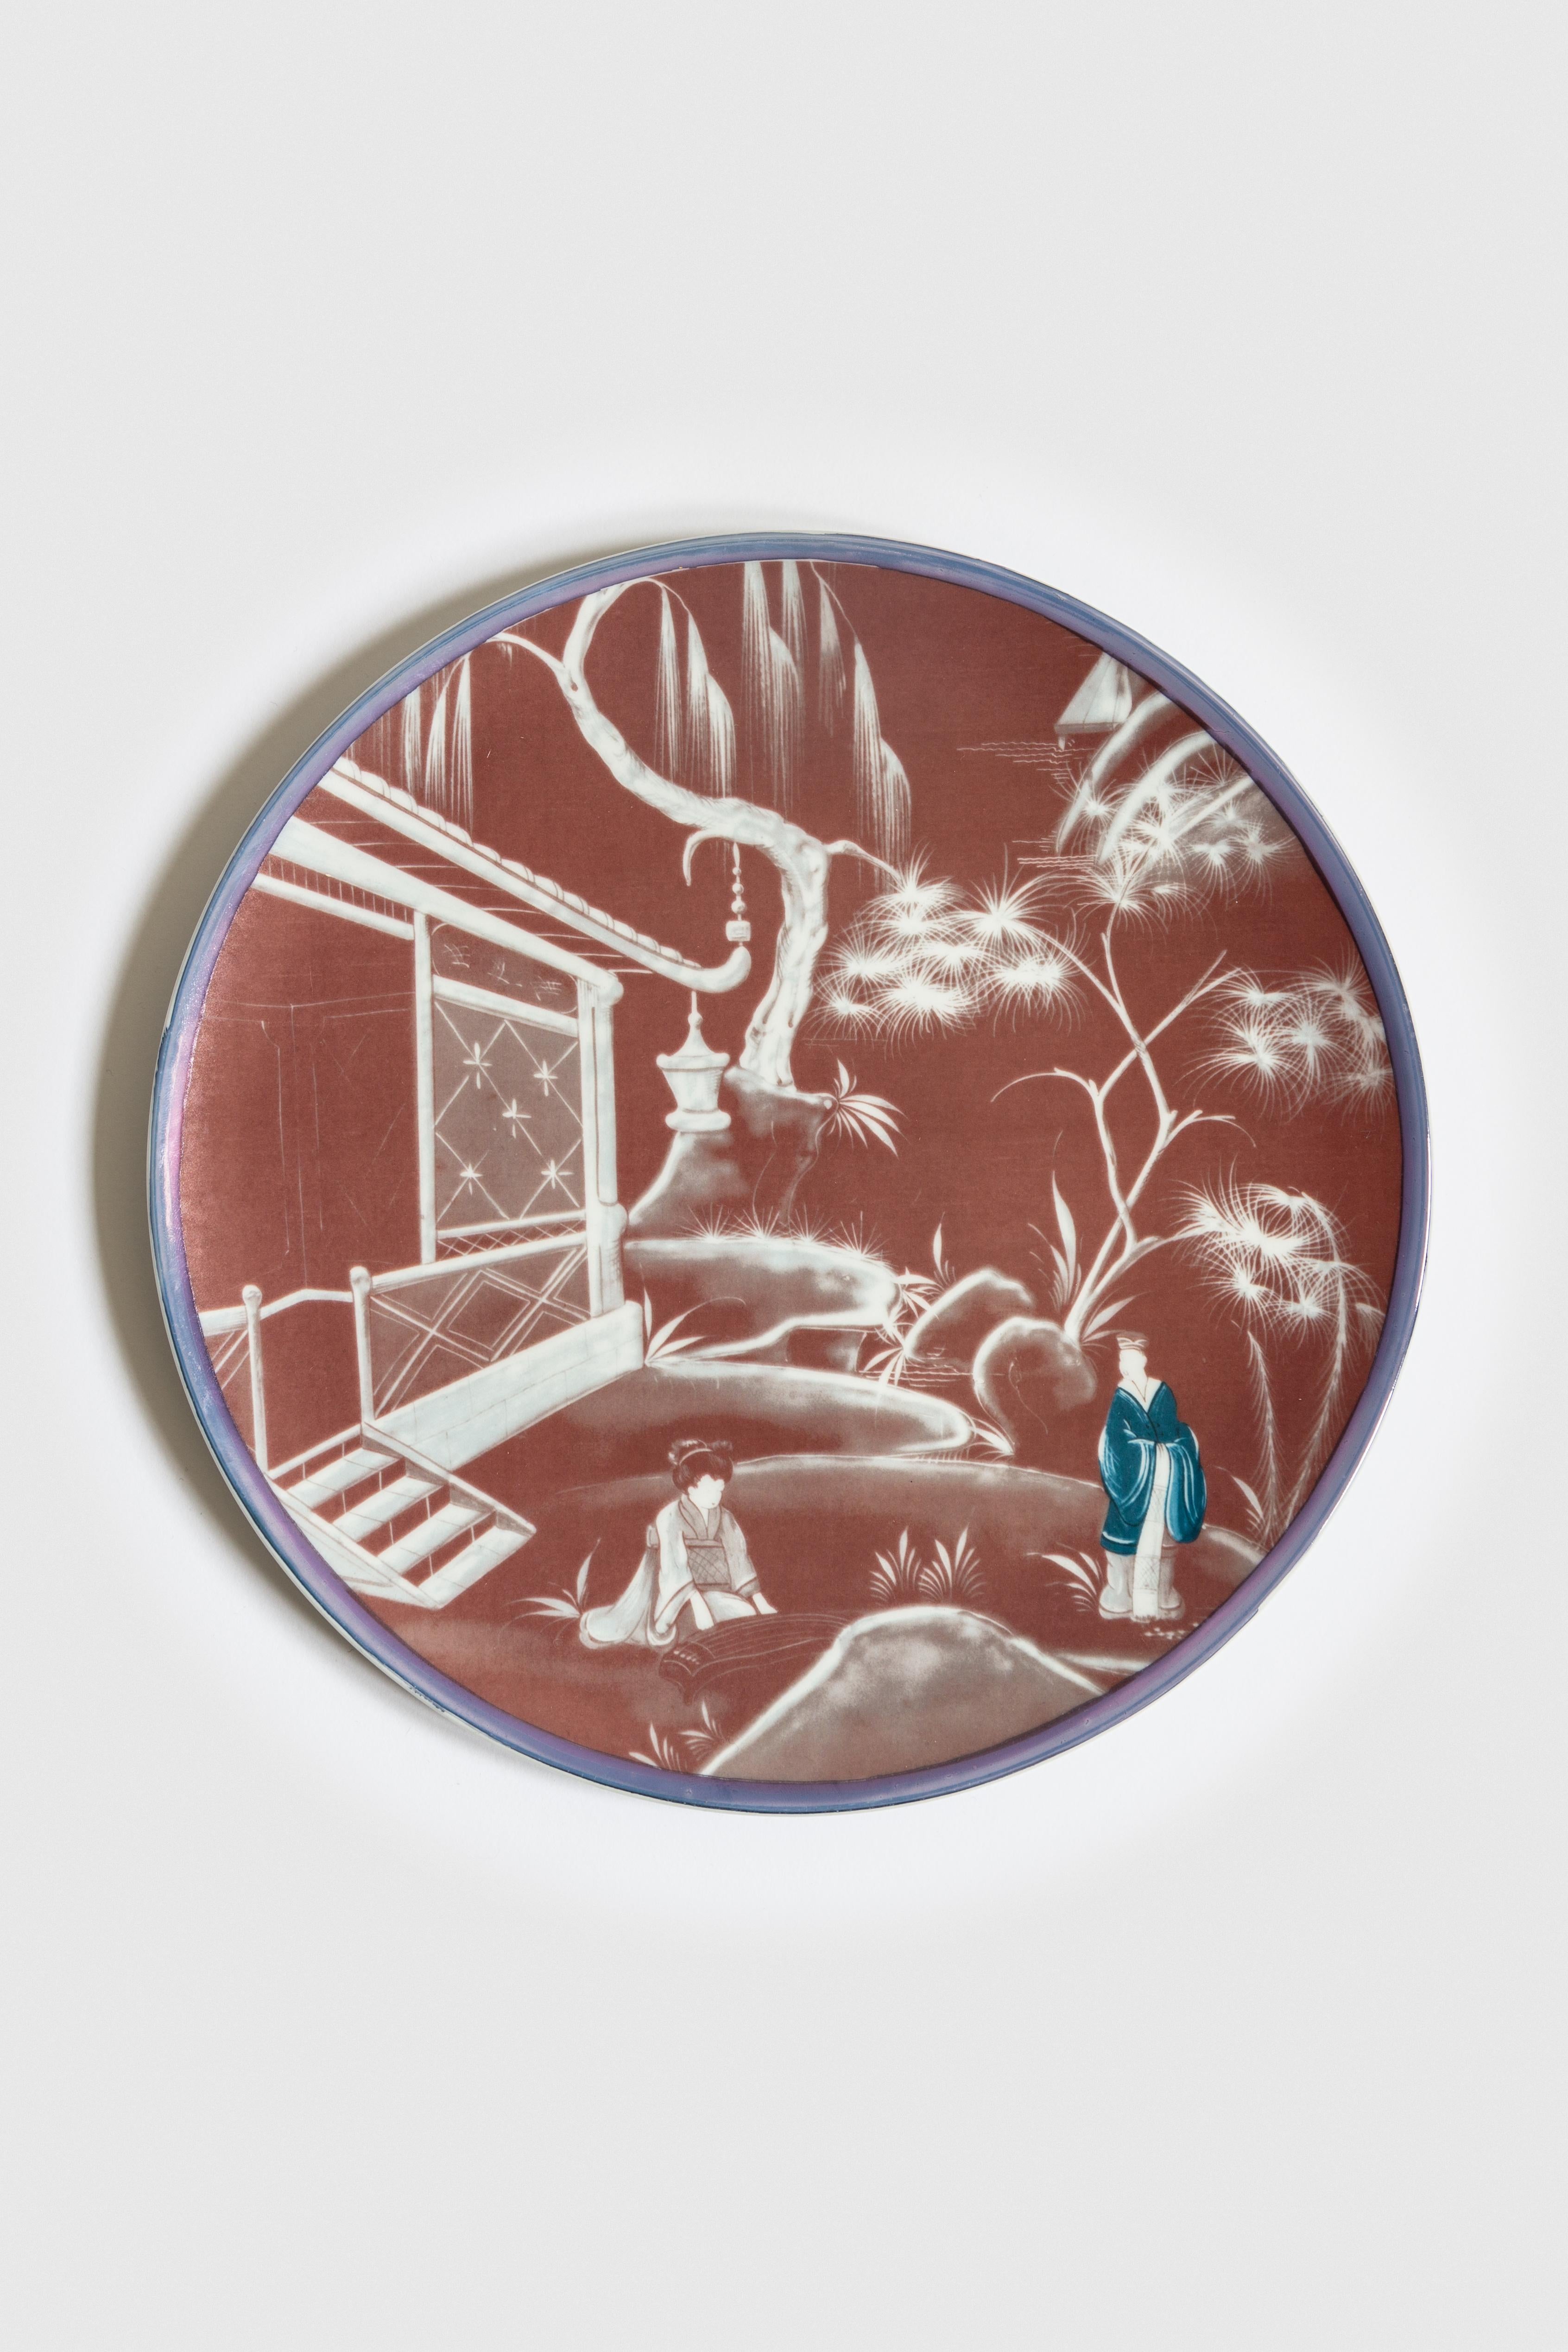 Natsumi, Six Contemporary Porcelain Dinner Plates with Decorative Design In New Condition For Sale In Milano, Lombardia